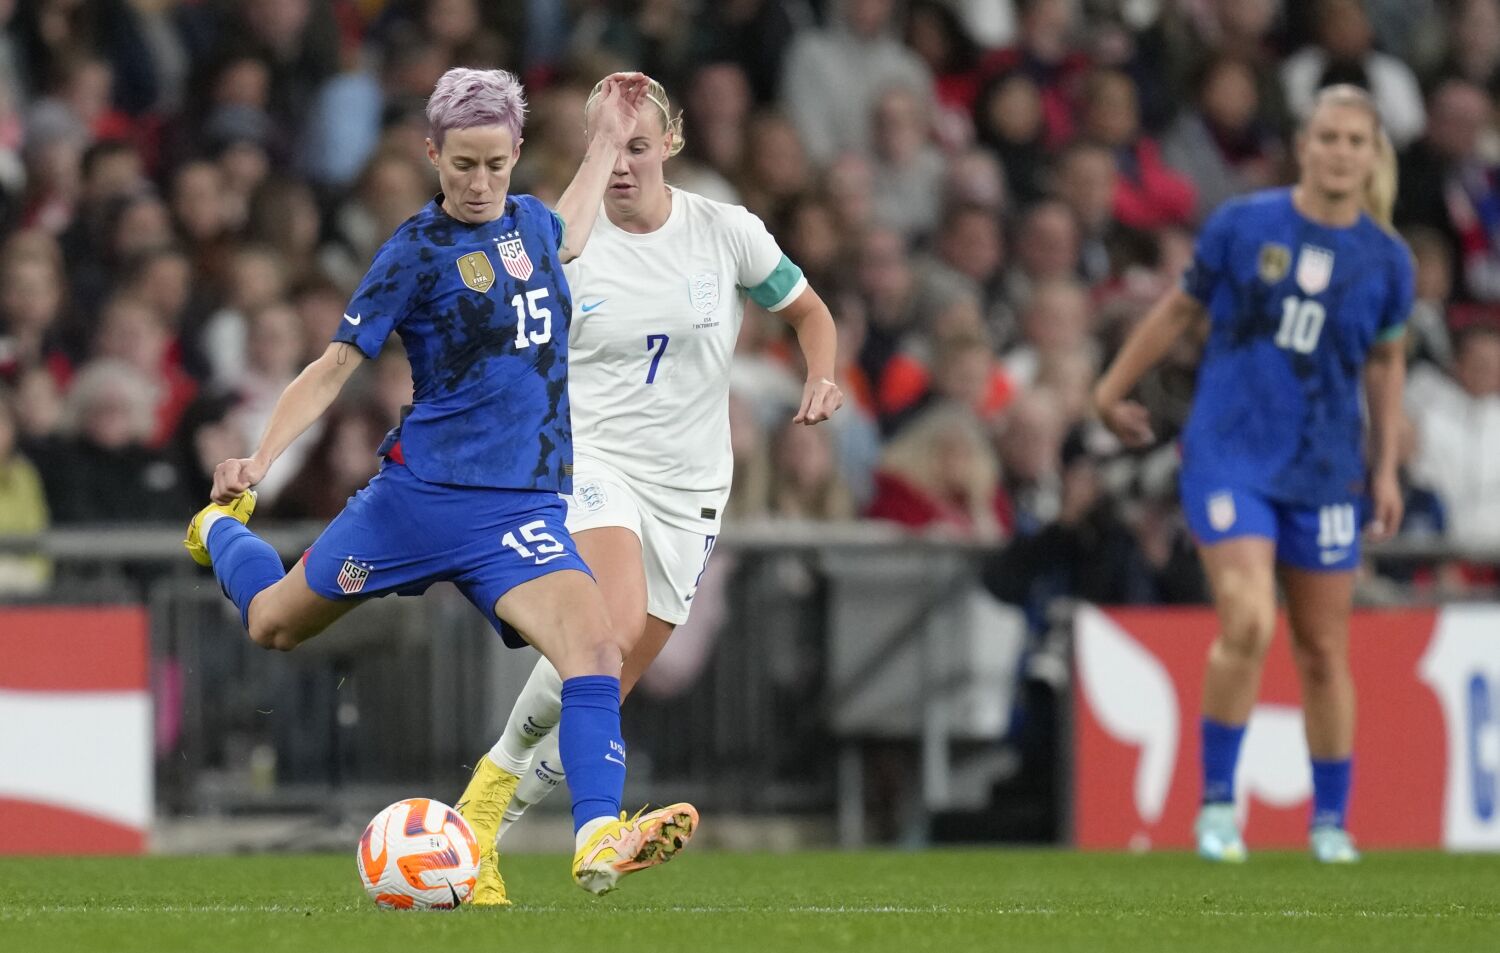 U.S. women's soccer team to face Vietnam, Netherlands at next year's World Cup